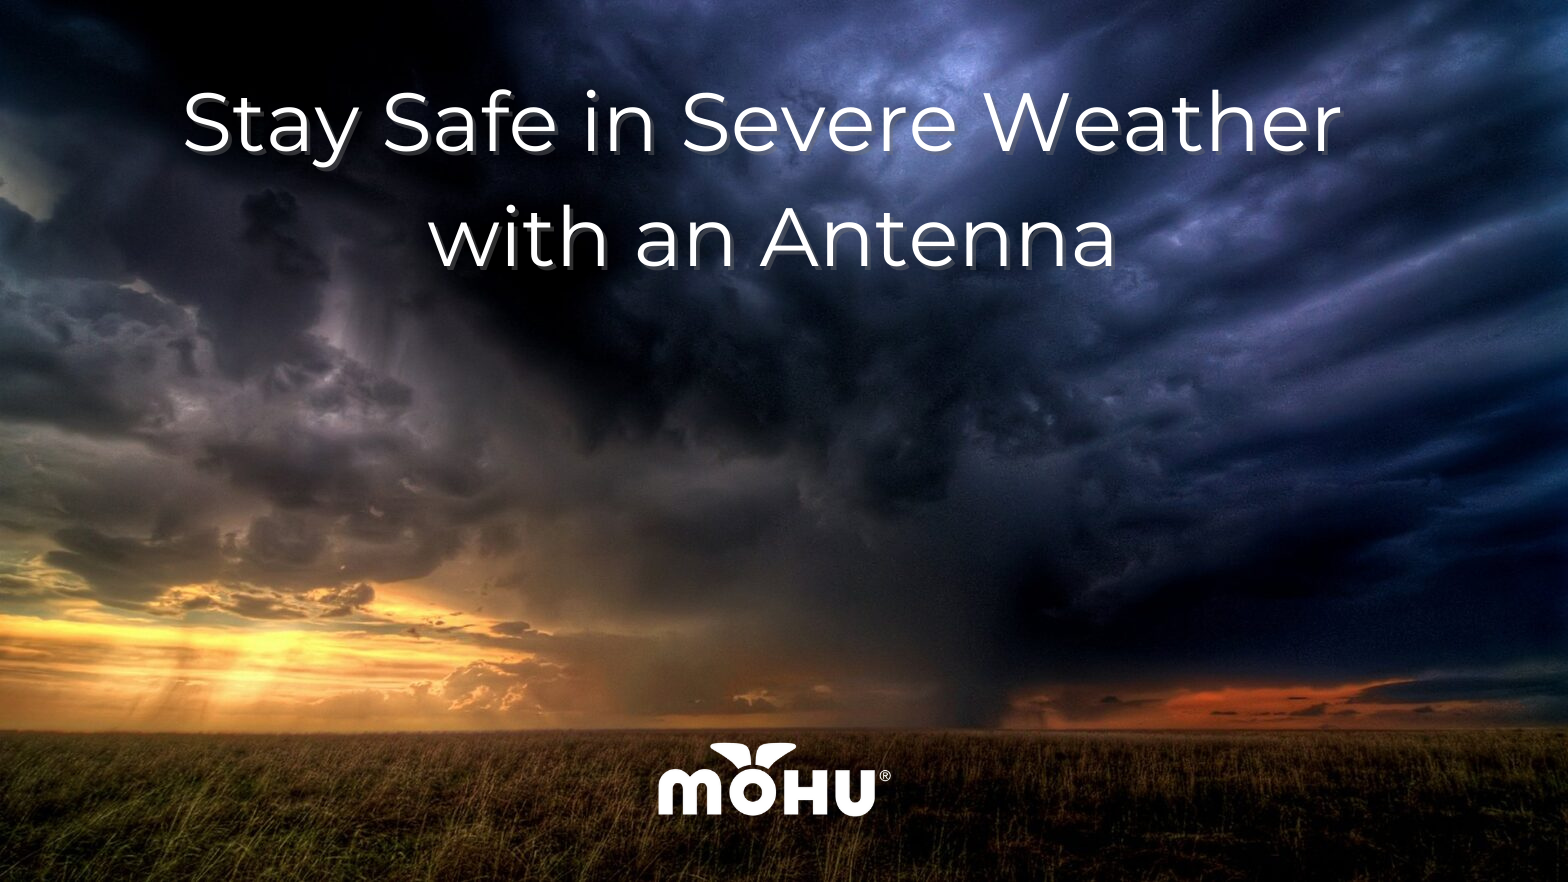 image of a field with a dark stormy sky, Stay Safe in Severe Weather with an Antenna and the mohu logo